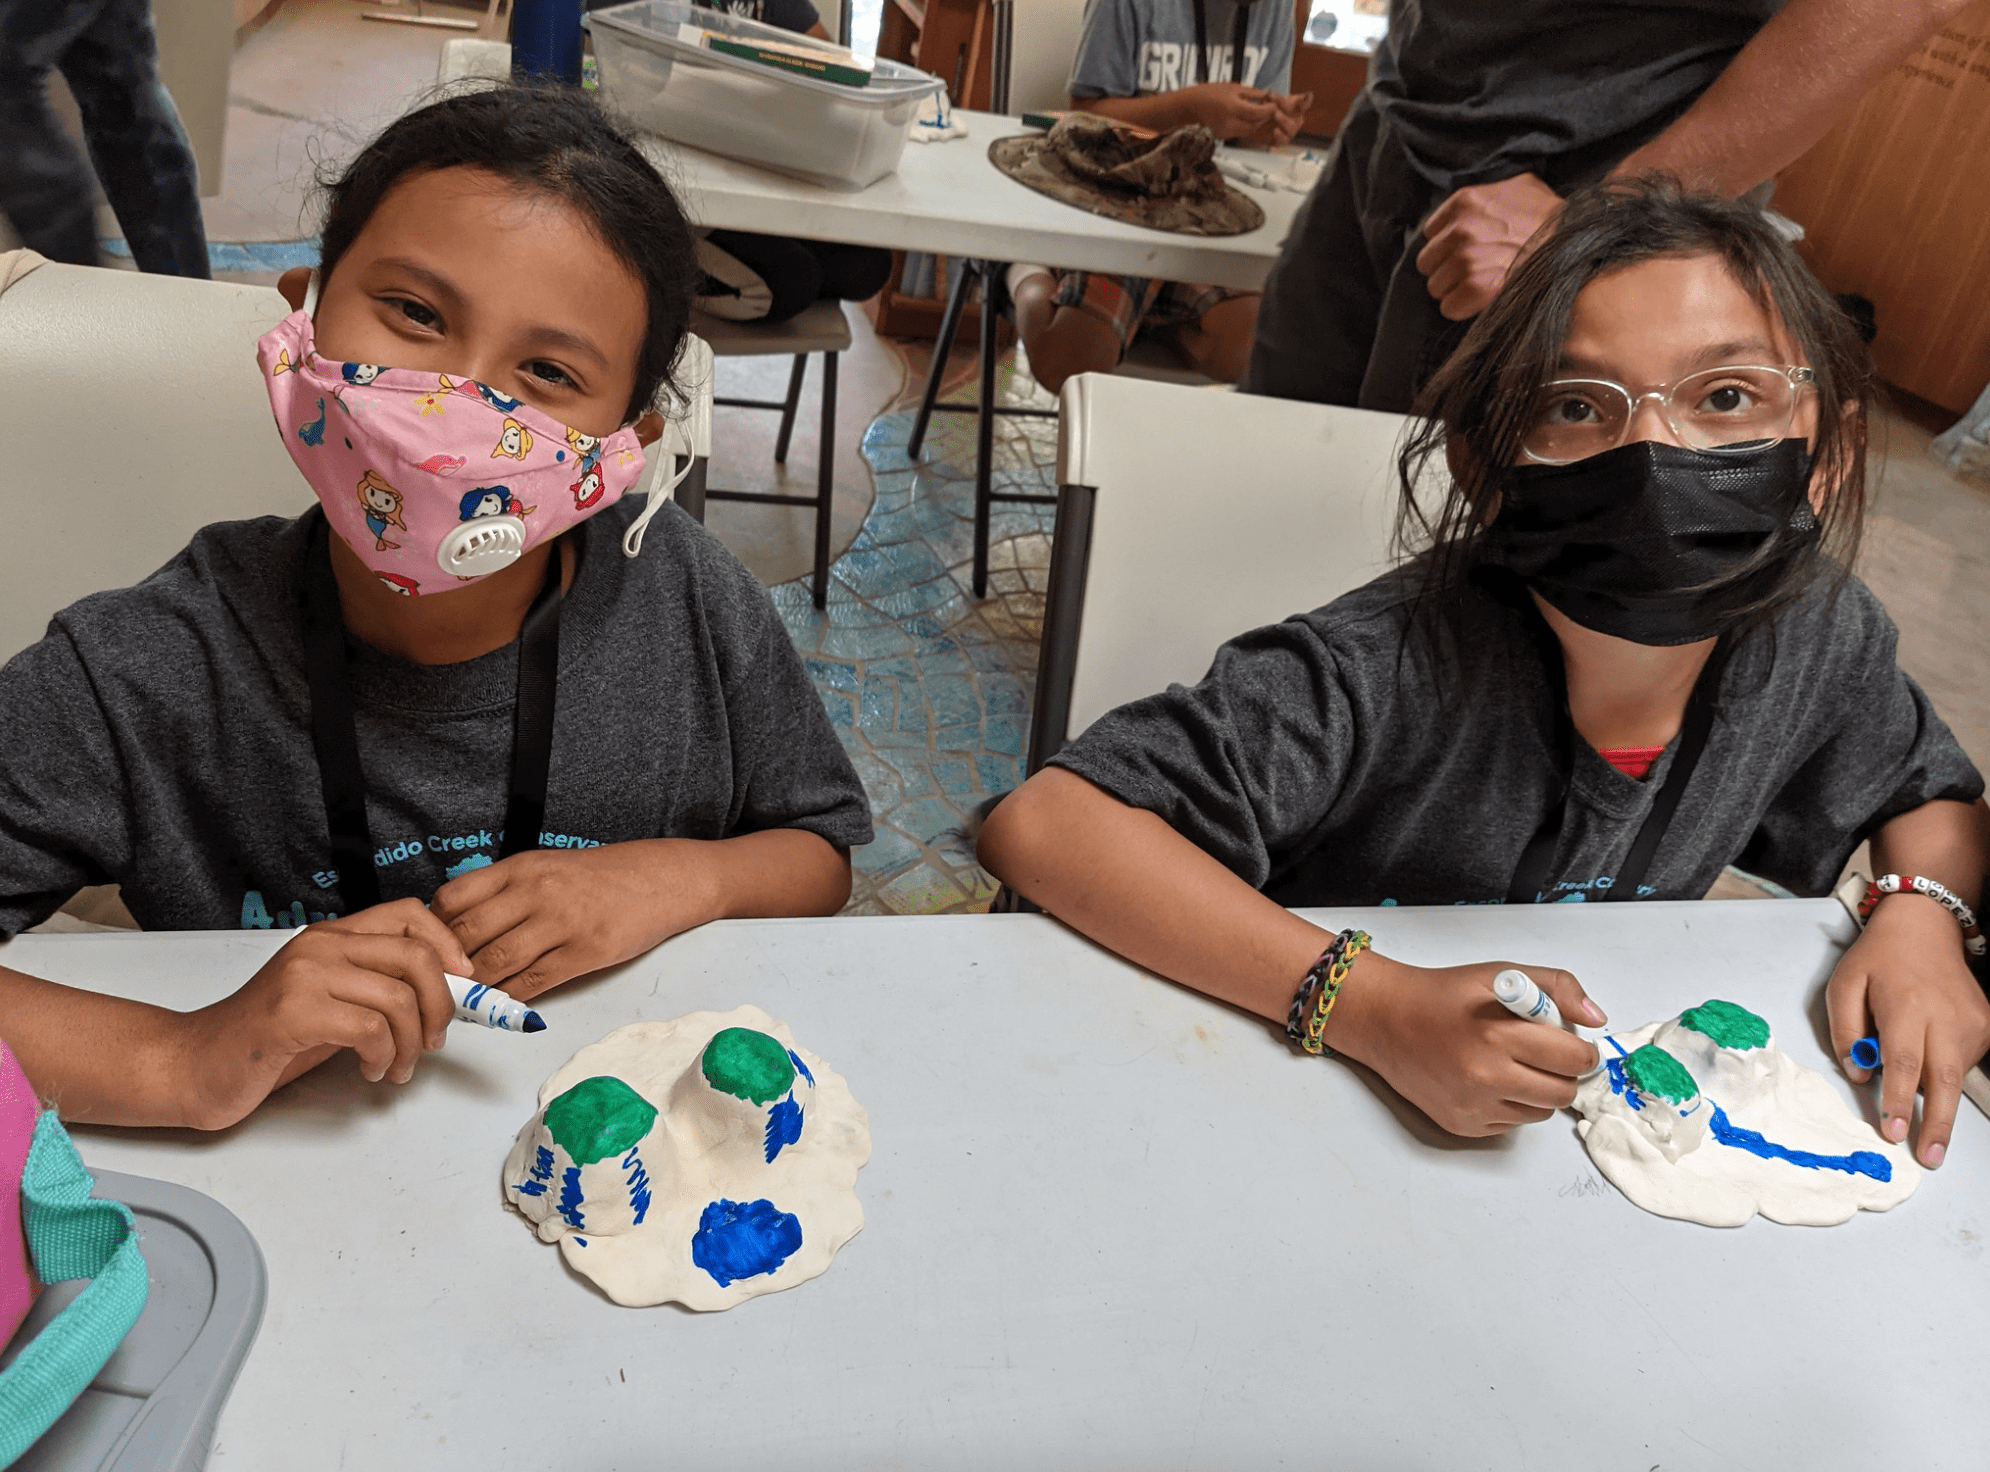 Two elementary age students paint clay and smile at the camera.